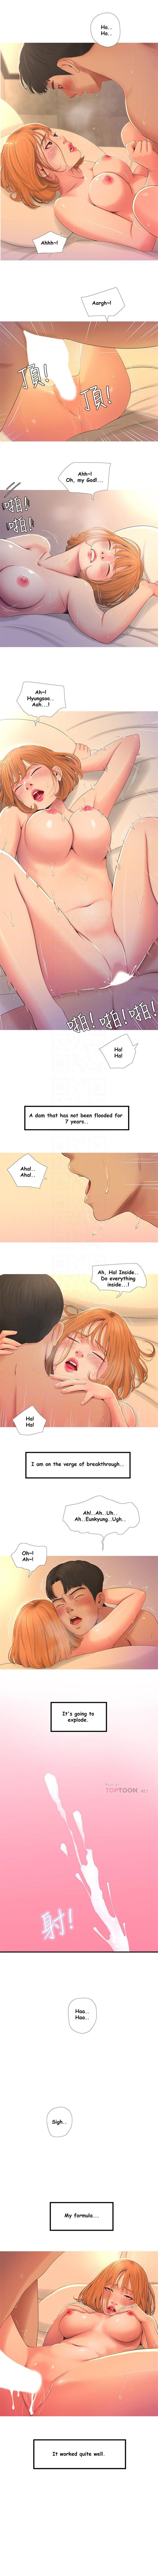 Viet Nam One's In-Laws Virgins Chapter 1-2 (Ongoing) [English] Suckingcock - Page 12